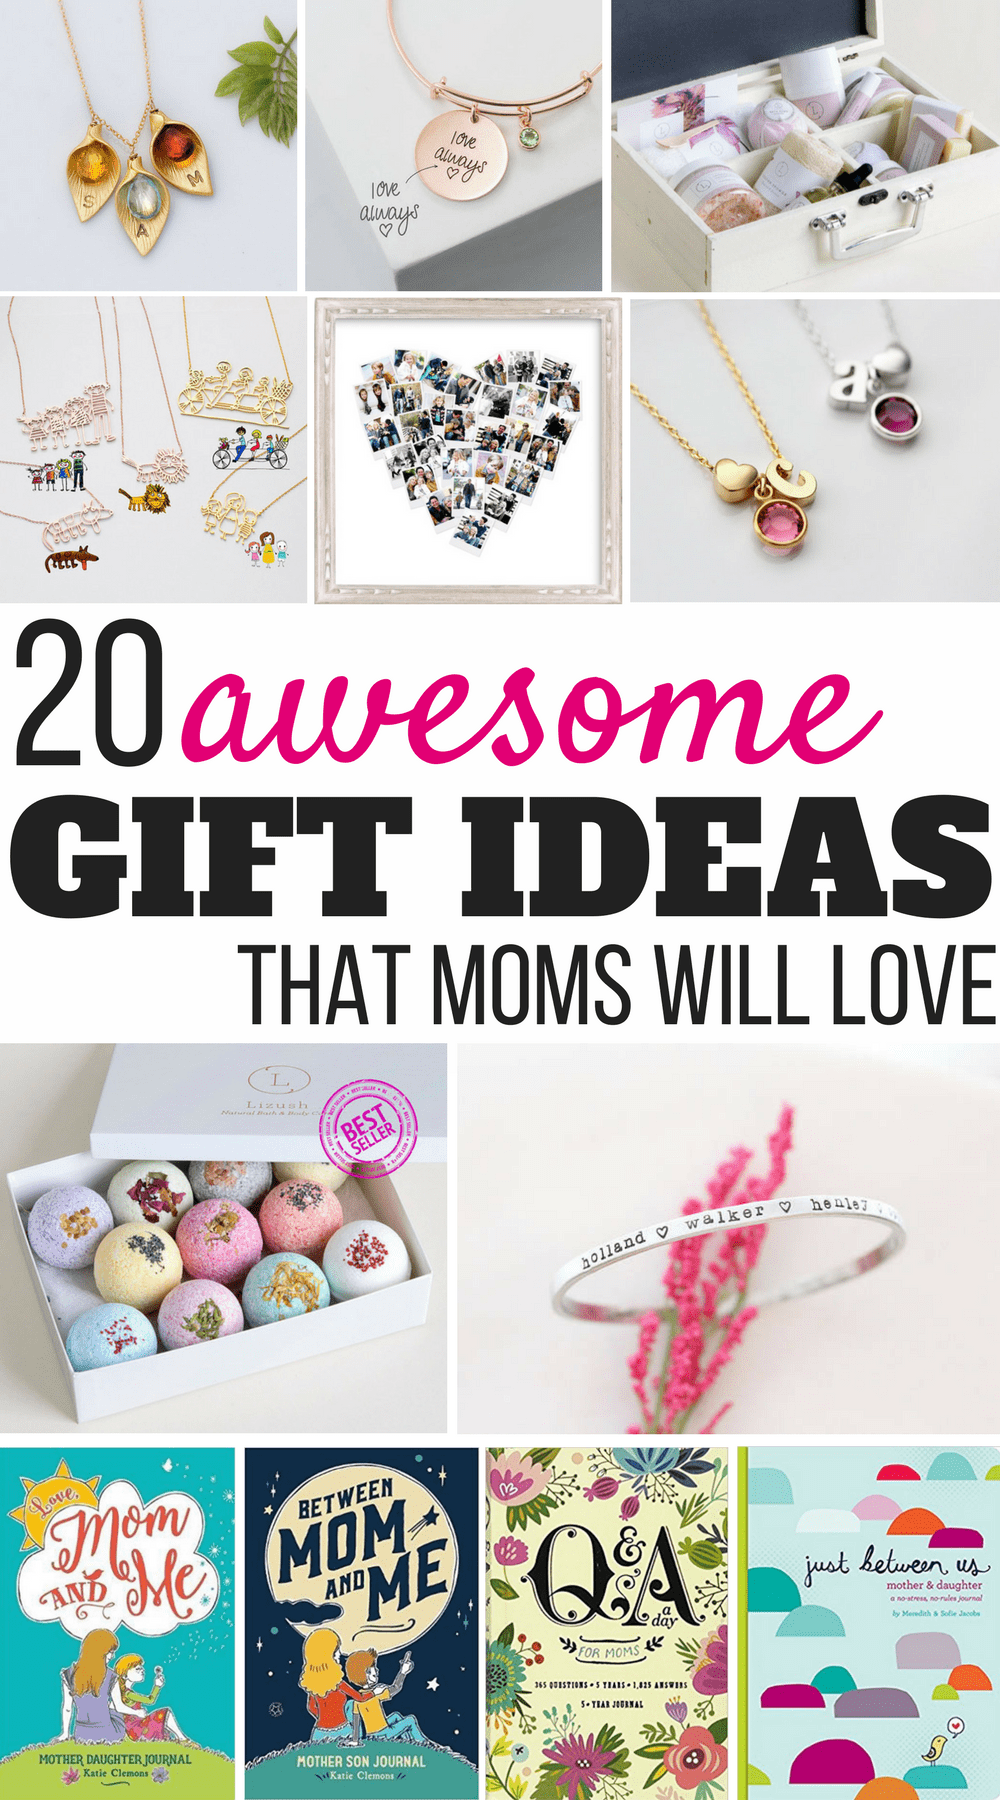 Best gifts for moms: If you are looking for an awesome gift for a mom, here is a list of unique ideas to inspire you! These are perfect for birthdays, Mother's Day, and any other special occasions! | Gift ideas for mom